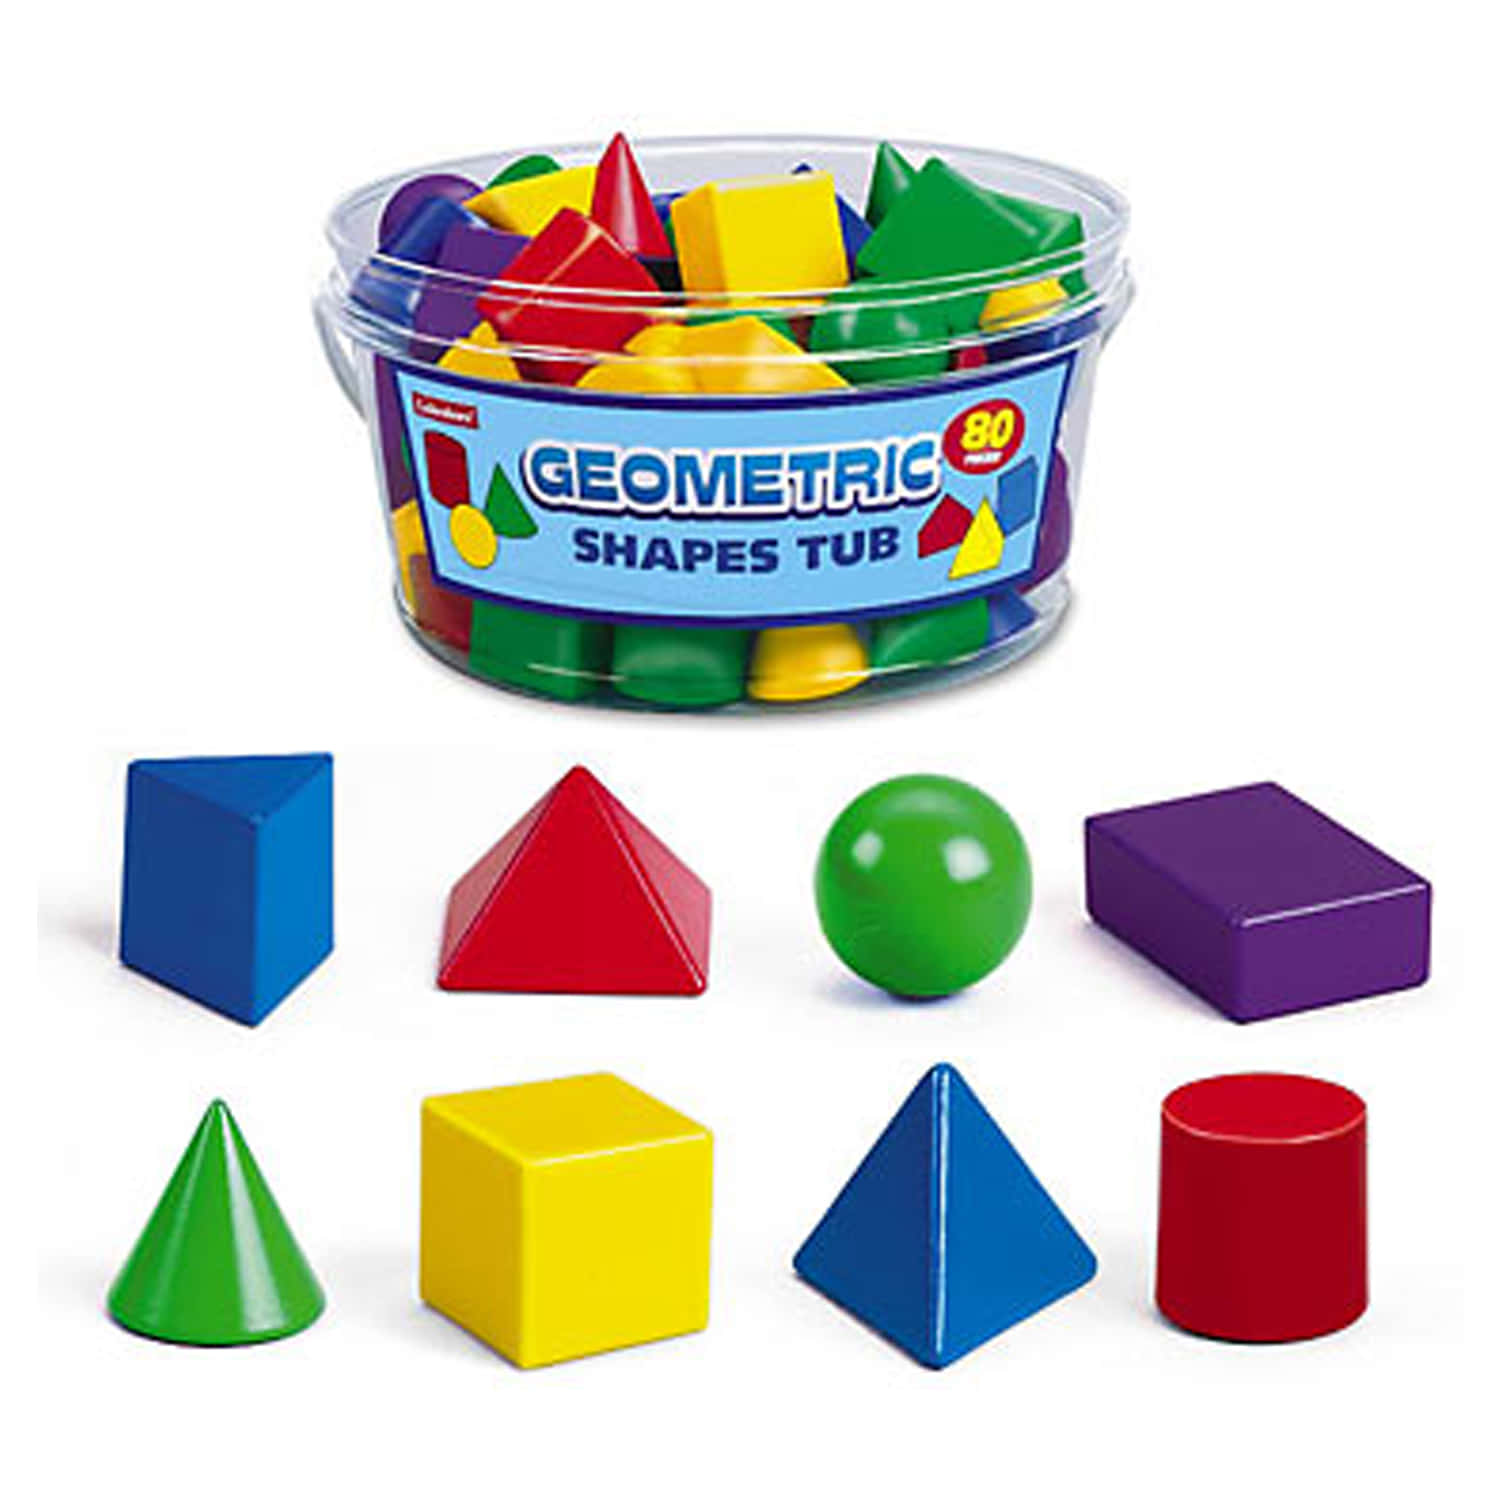 Geometric Shapes Tub Pictures